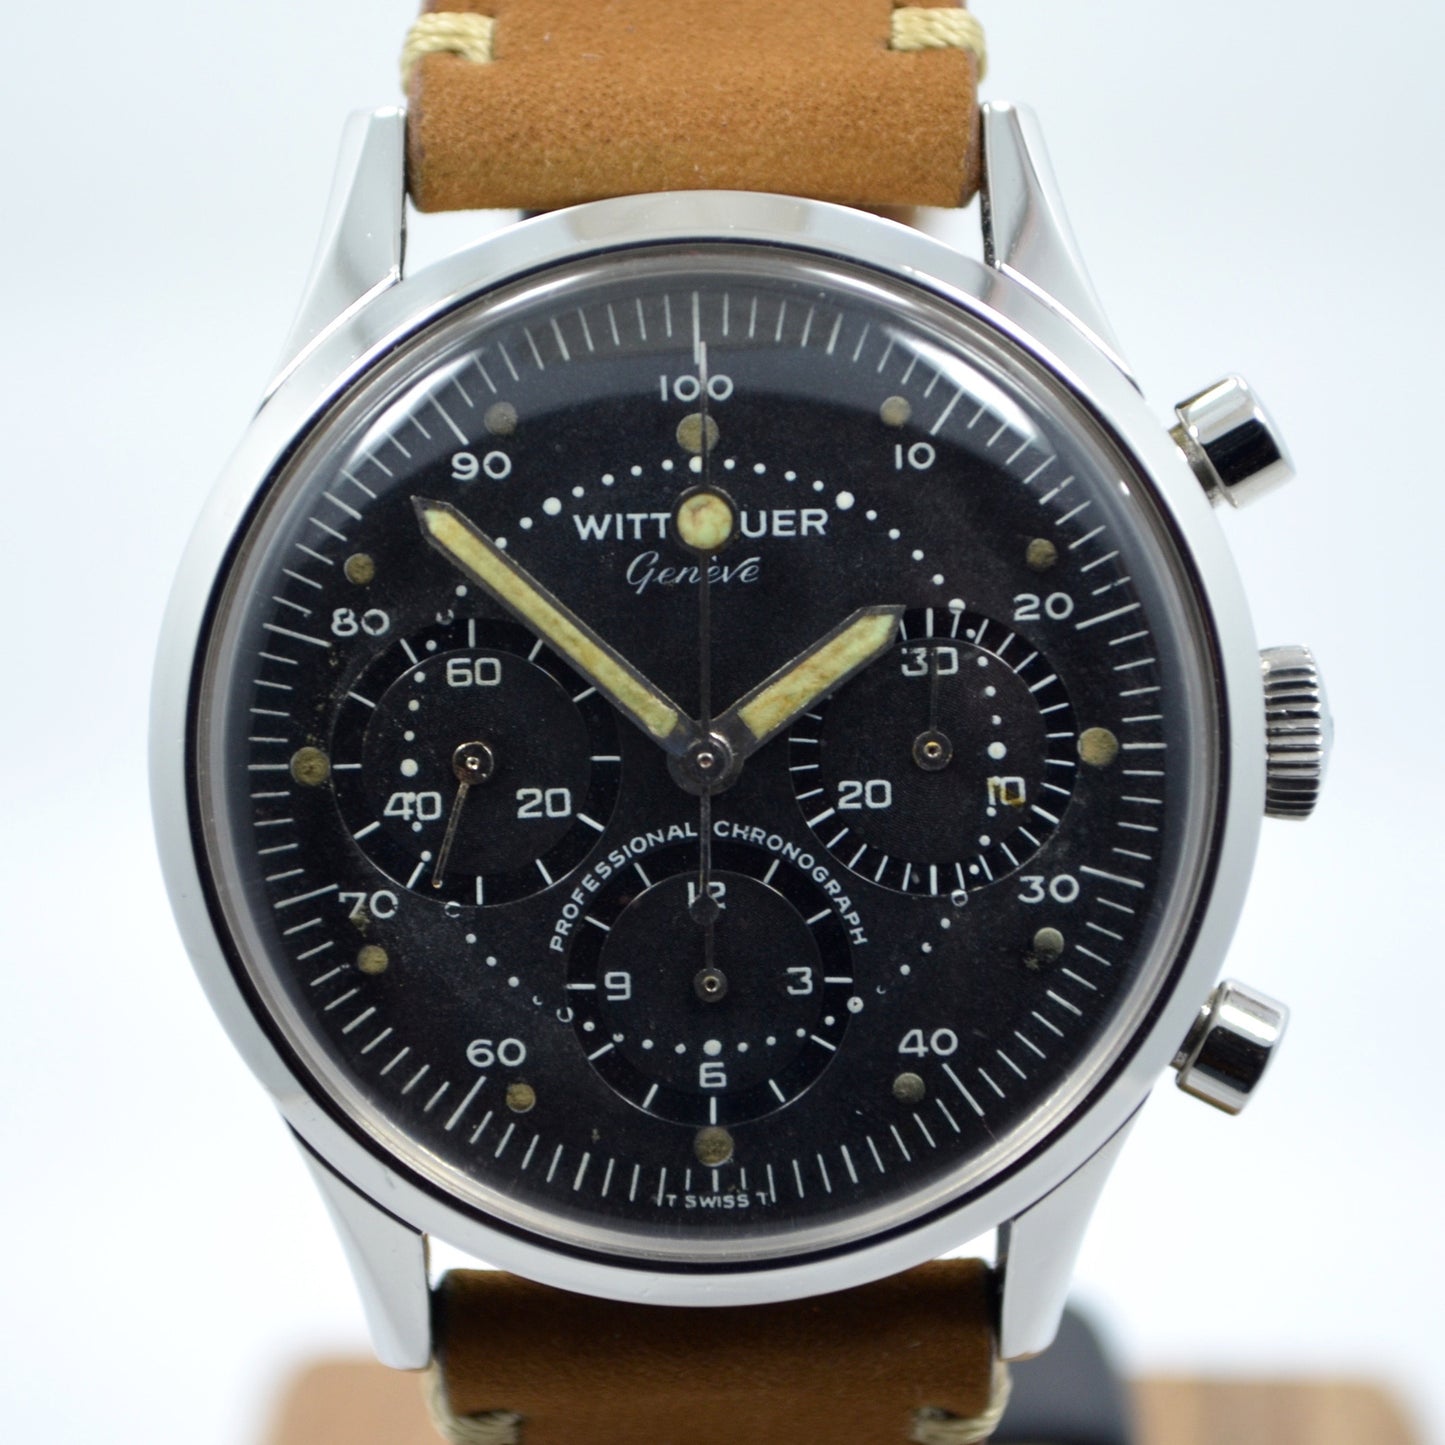 Vintage Wittnauer Professional Chronograph Steel Valjoux 72 Manual Wristwatch - Hashtag Watch Company